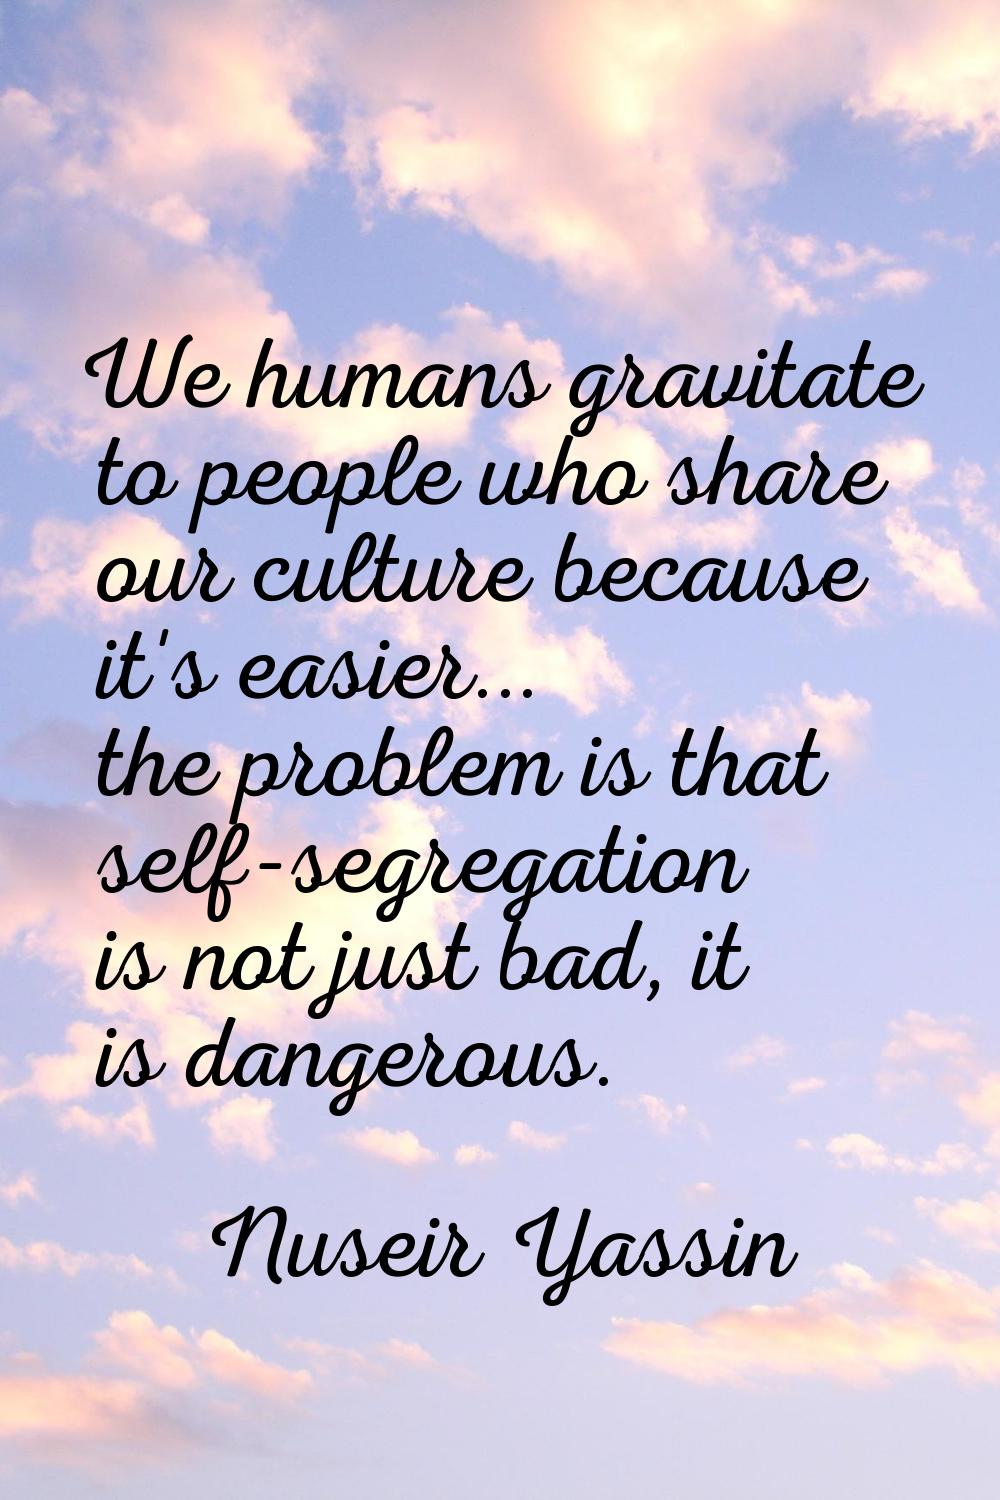 We humans gravitate to people who share our culture because it's easier... the problem is that self